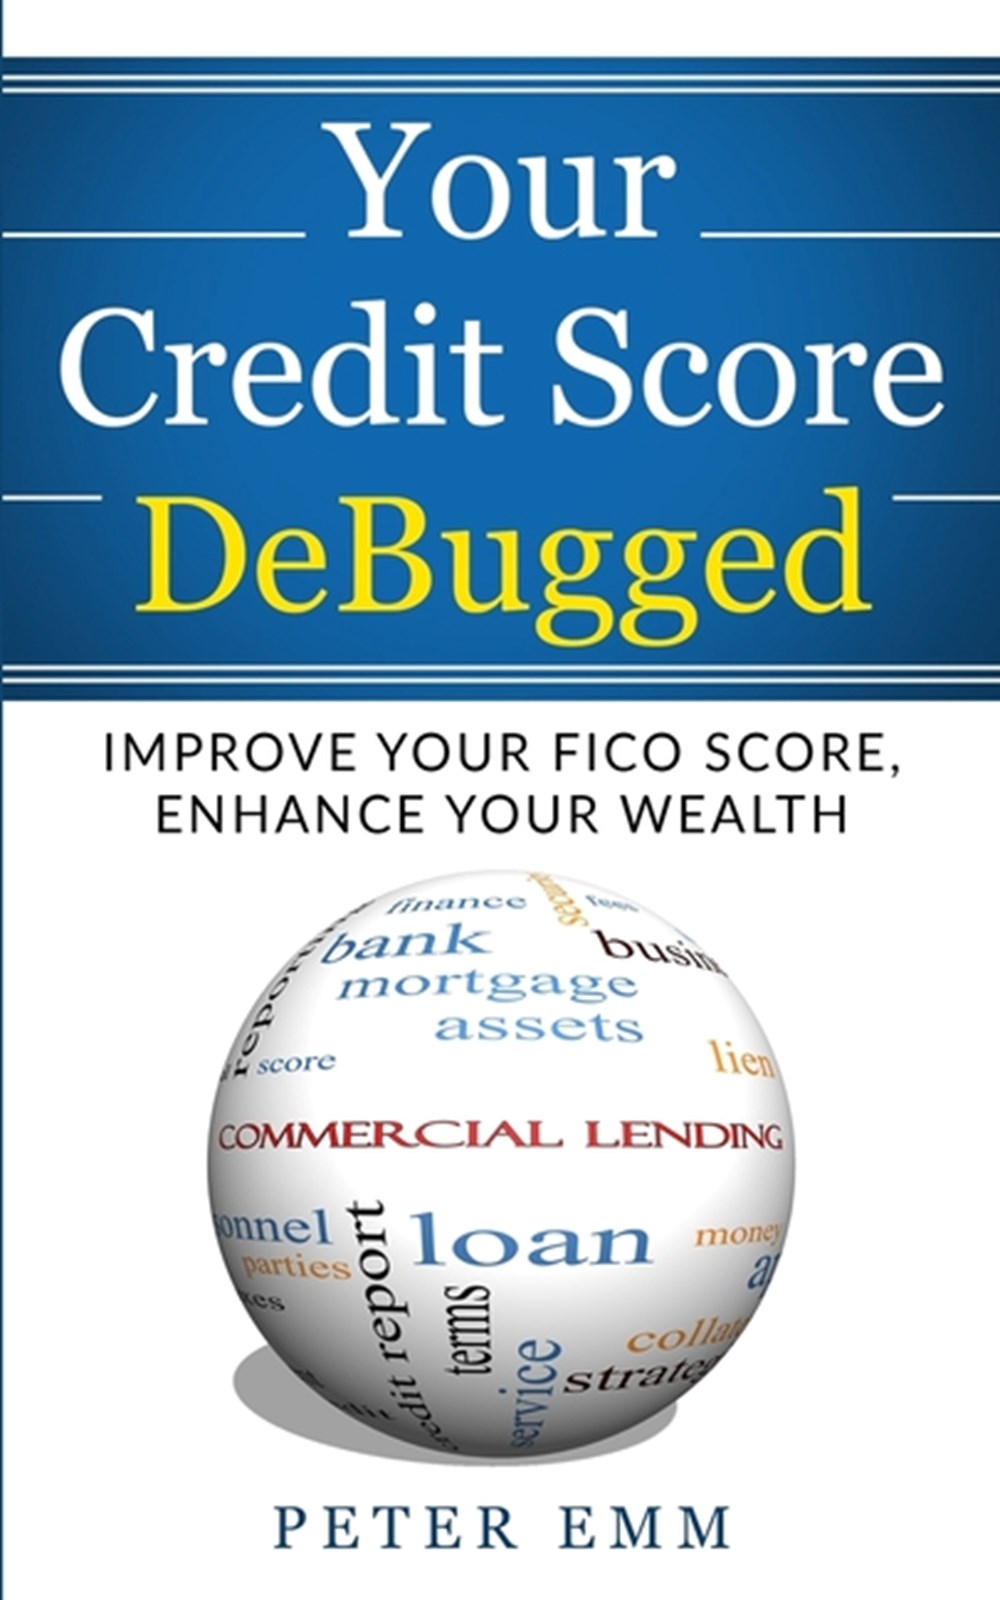 Your Credit Score DeBugged: Improve Your Credit Score, Enhance Your Wealth